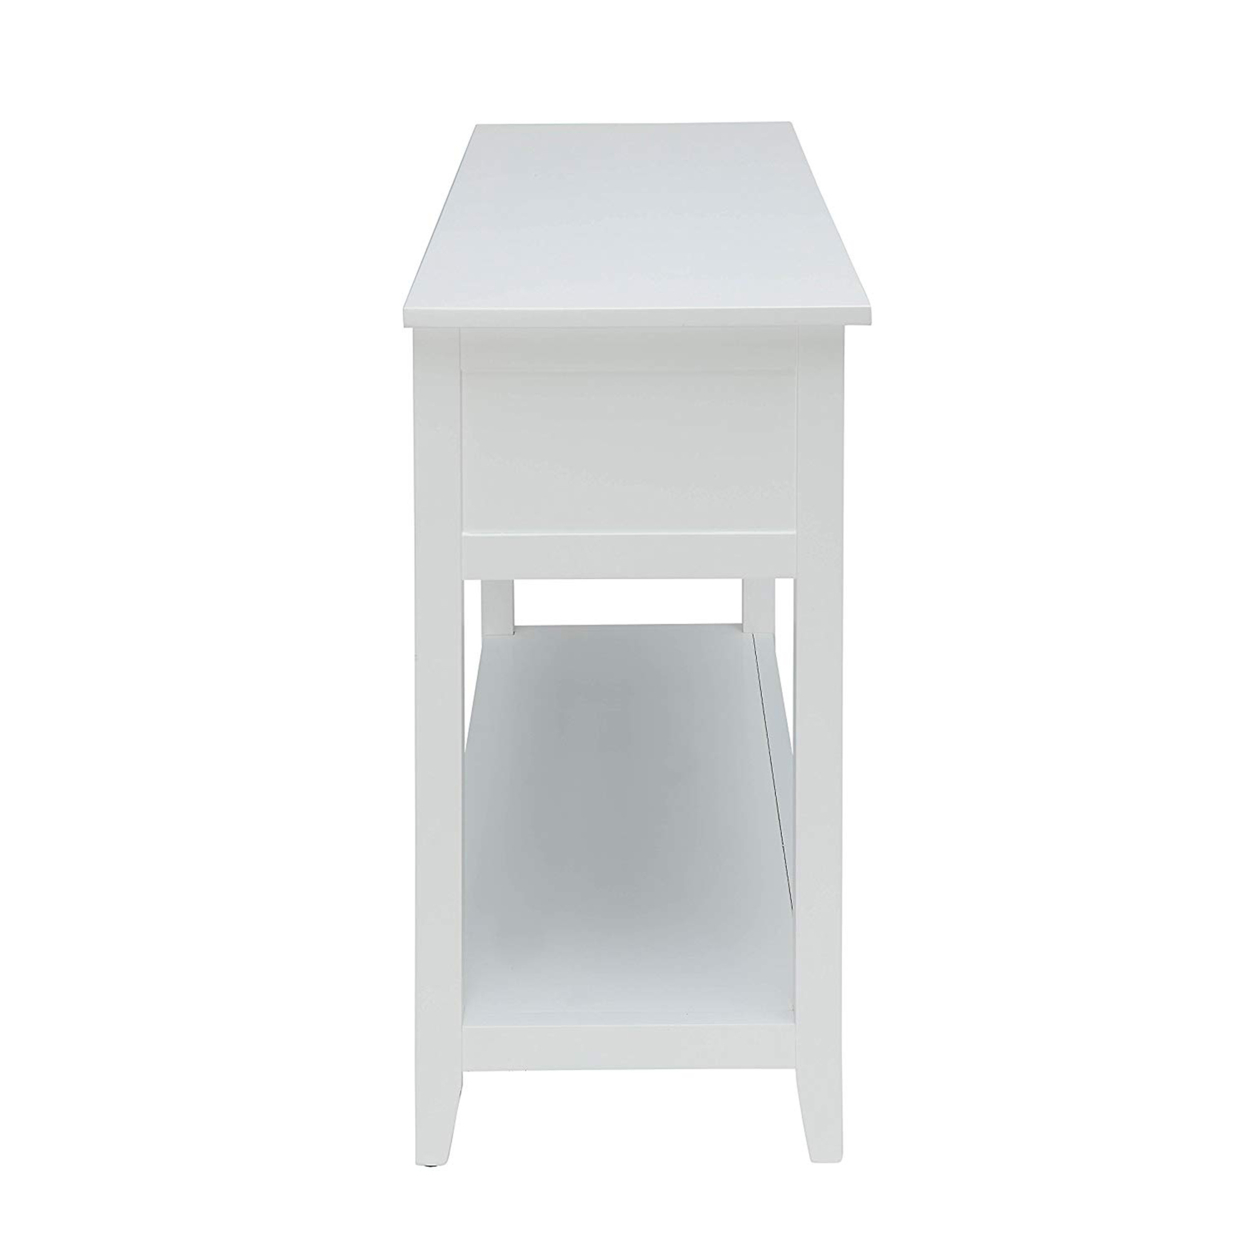 Flavius Console Table With 2 Drawers, White- Saltoro Sherpi